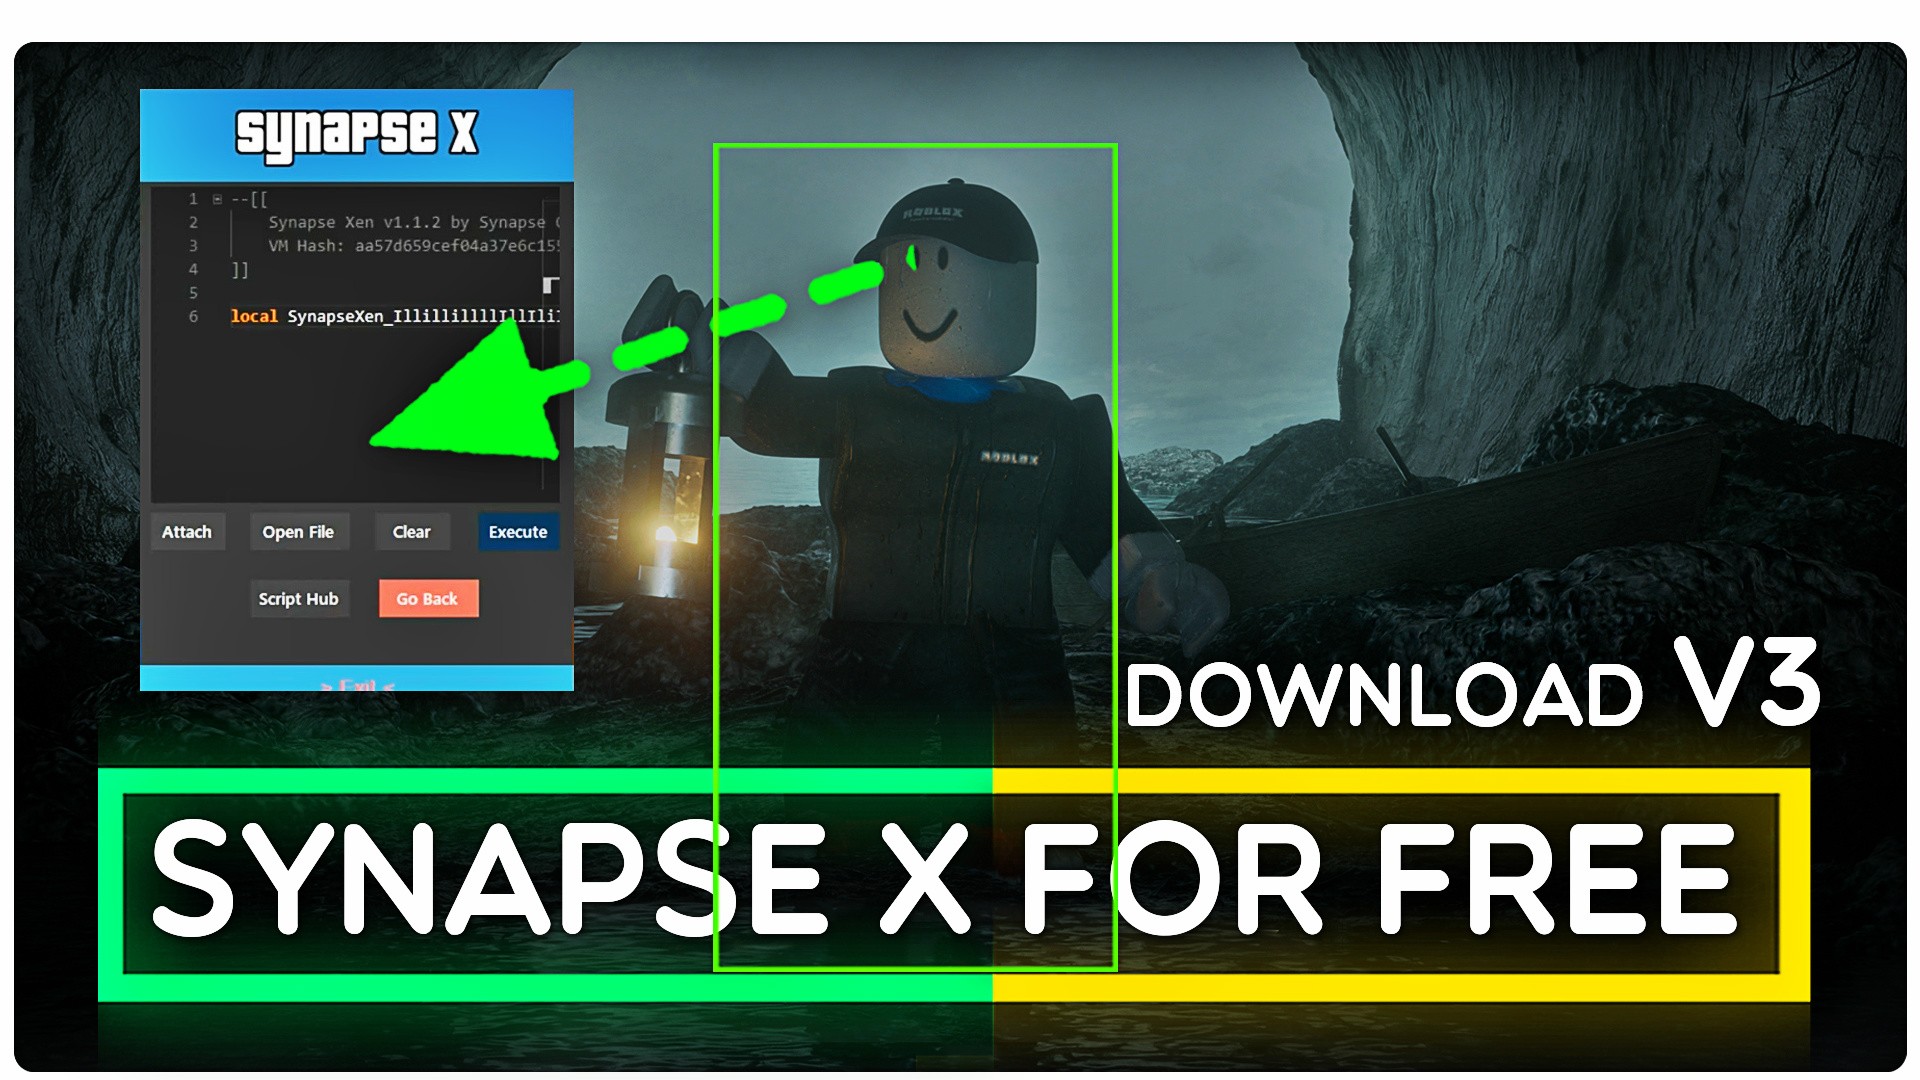 Synapse X Ver 3 Free Remake Teletype - roblox synapse x scripts